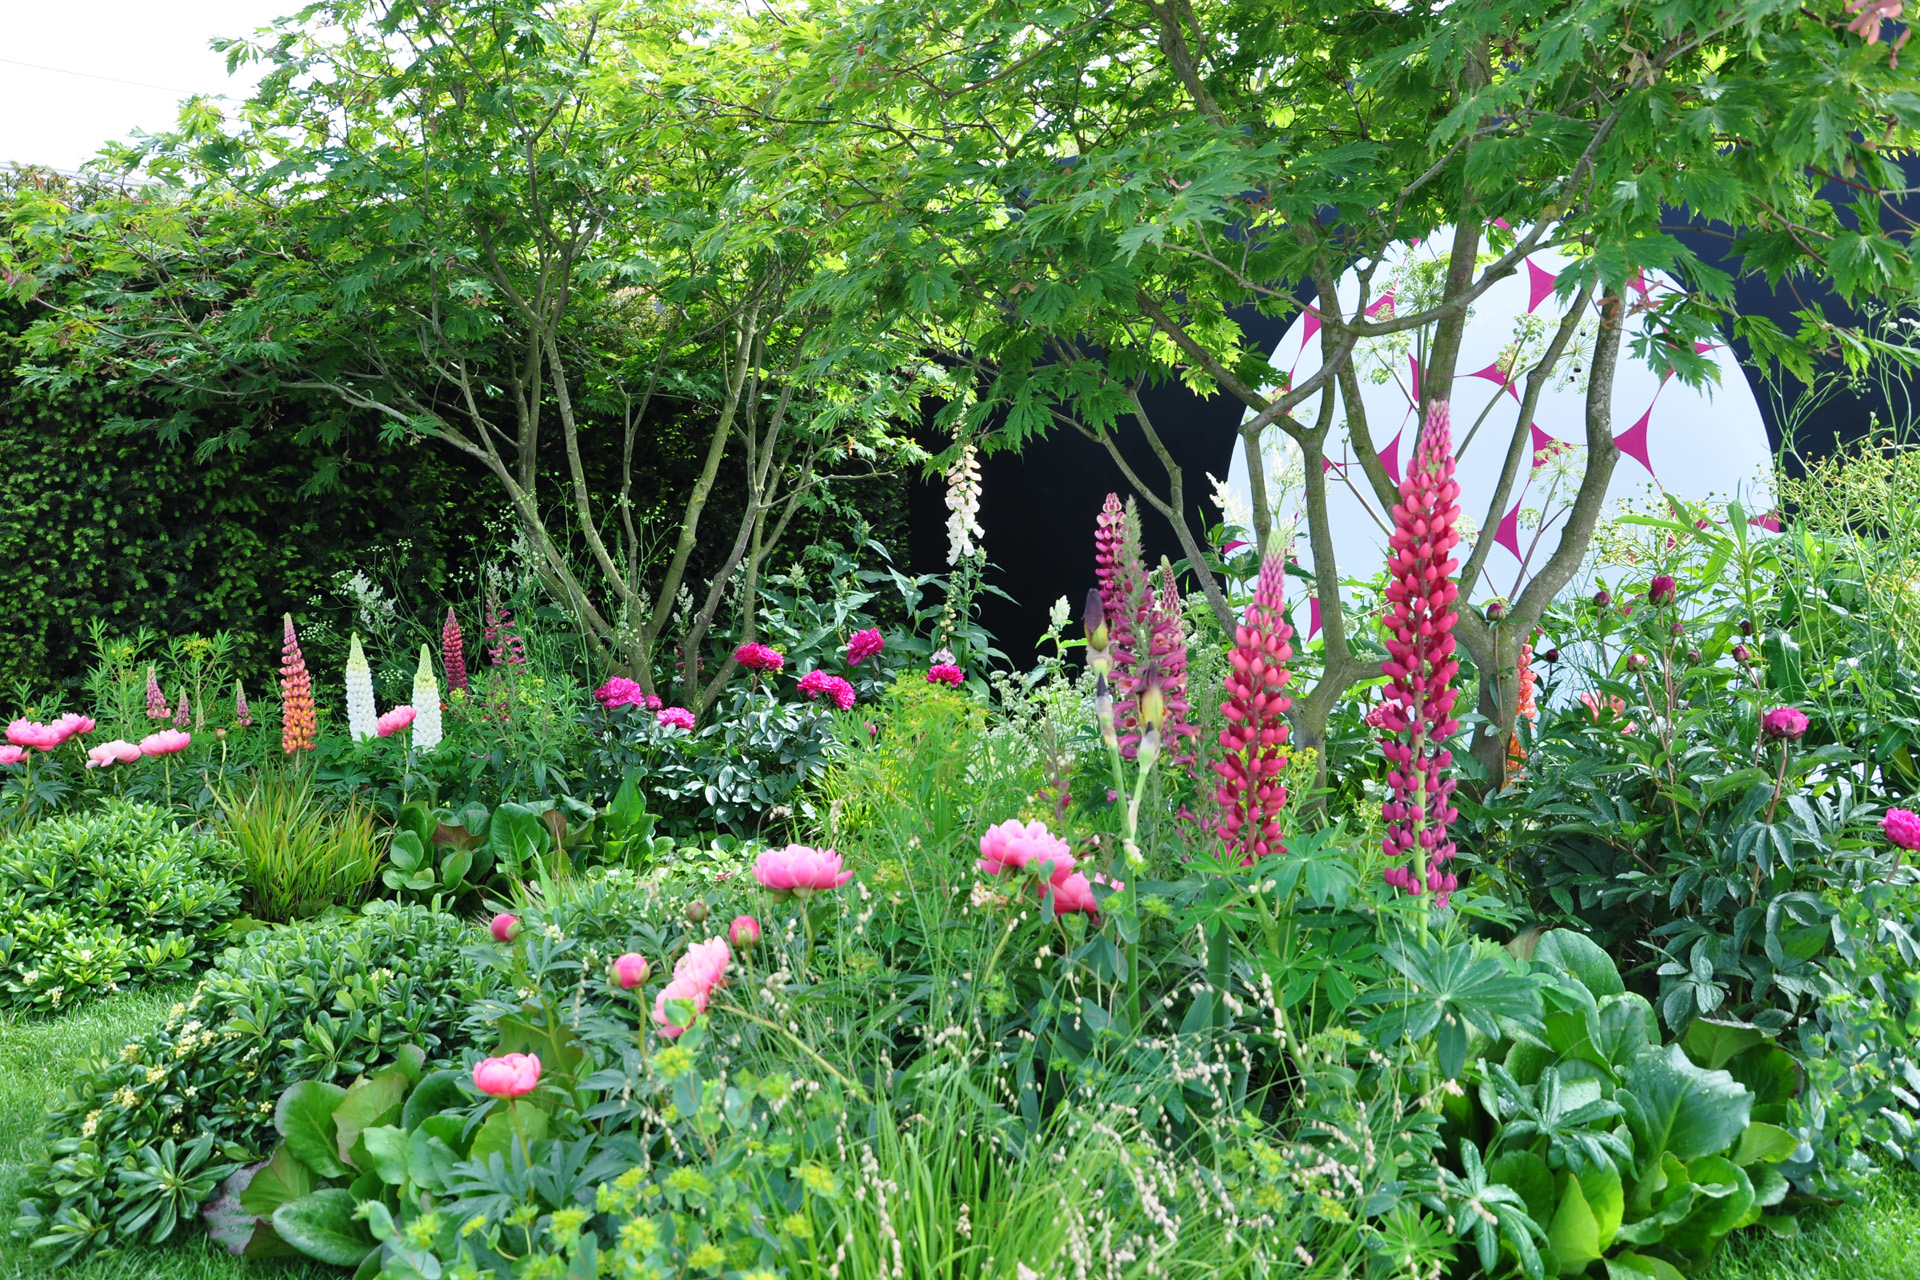 Lush, vibrant, pink flowers of lupins and peonies within a show garden at Royal Horticultural Society Chelsea Flower Show 2017